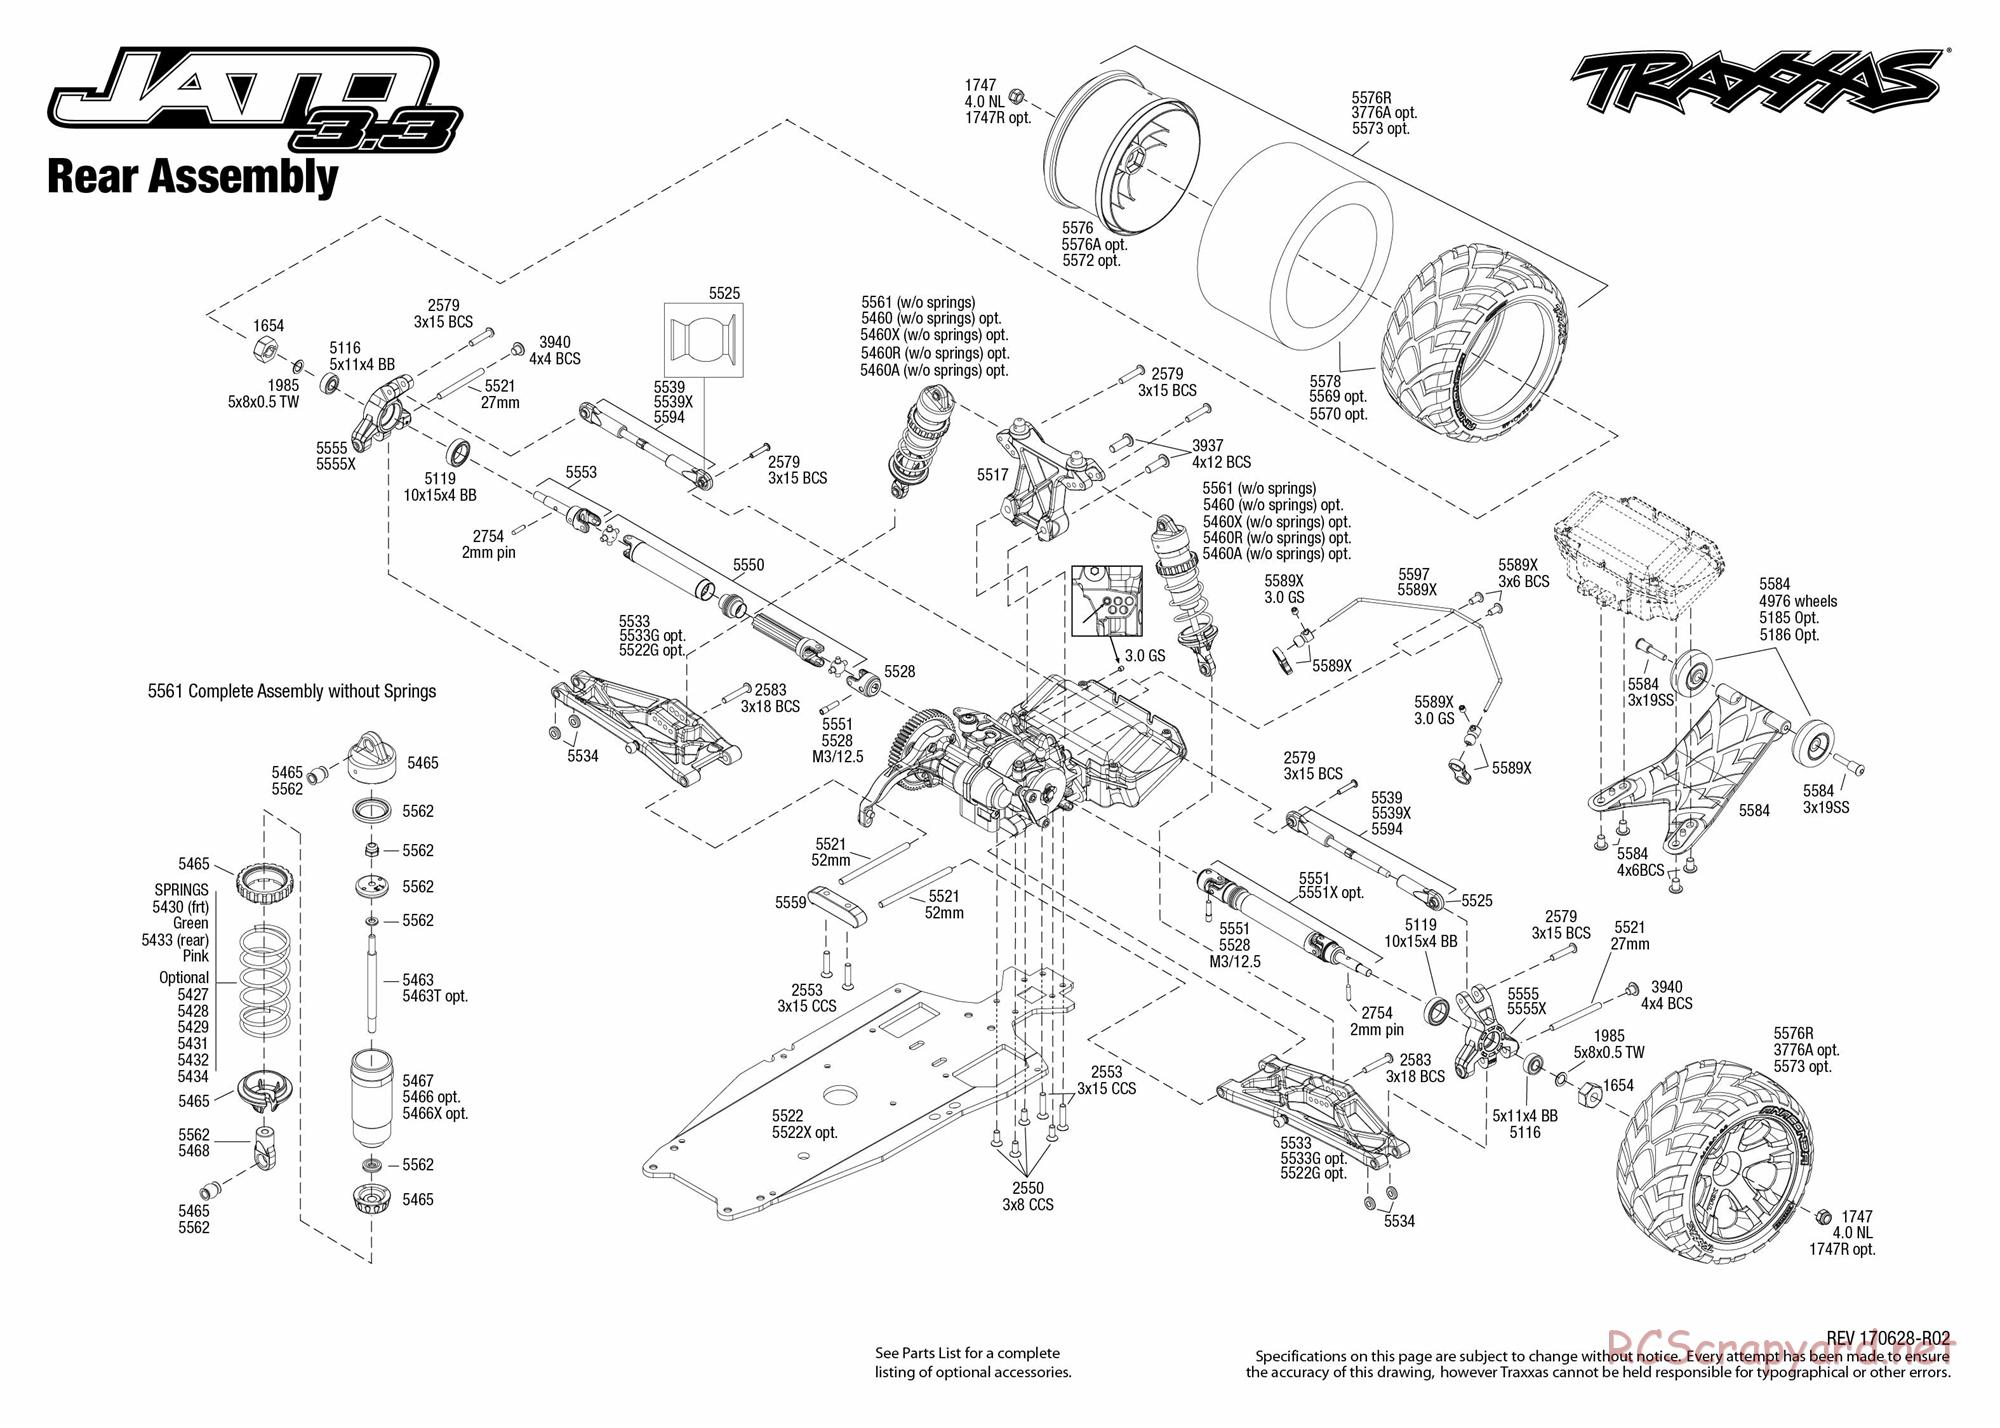 Traxxas - Jato 3.3 (2014) - Exploded Views - Page 4